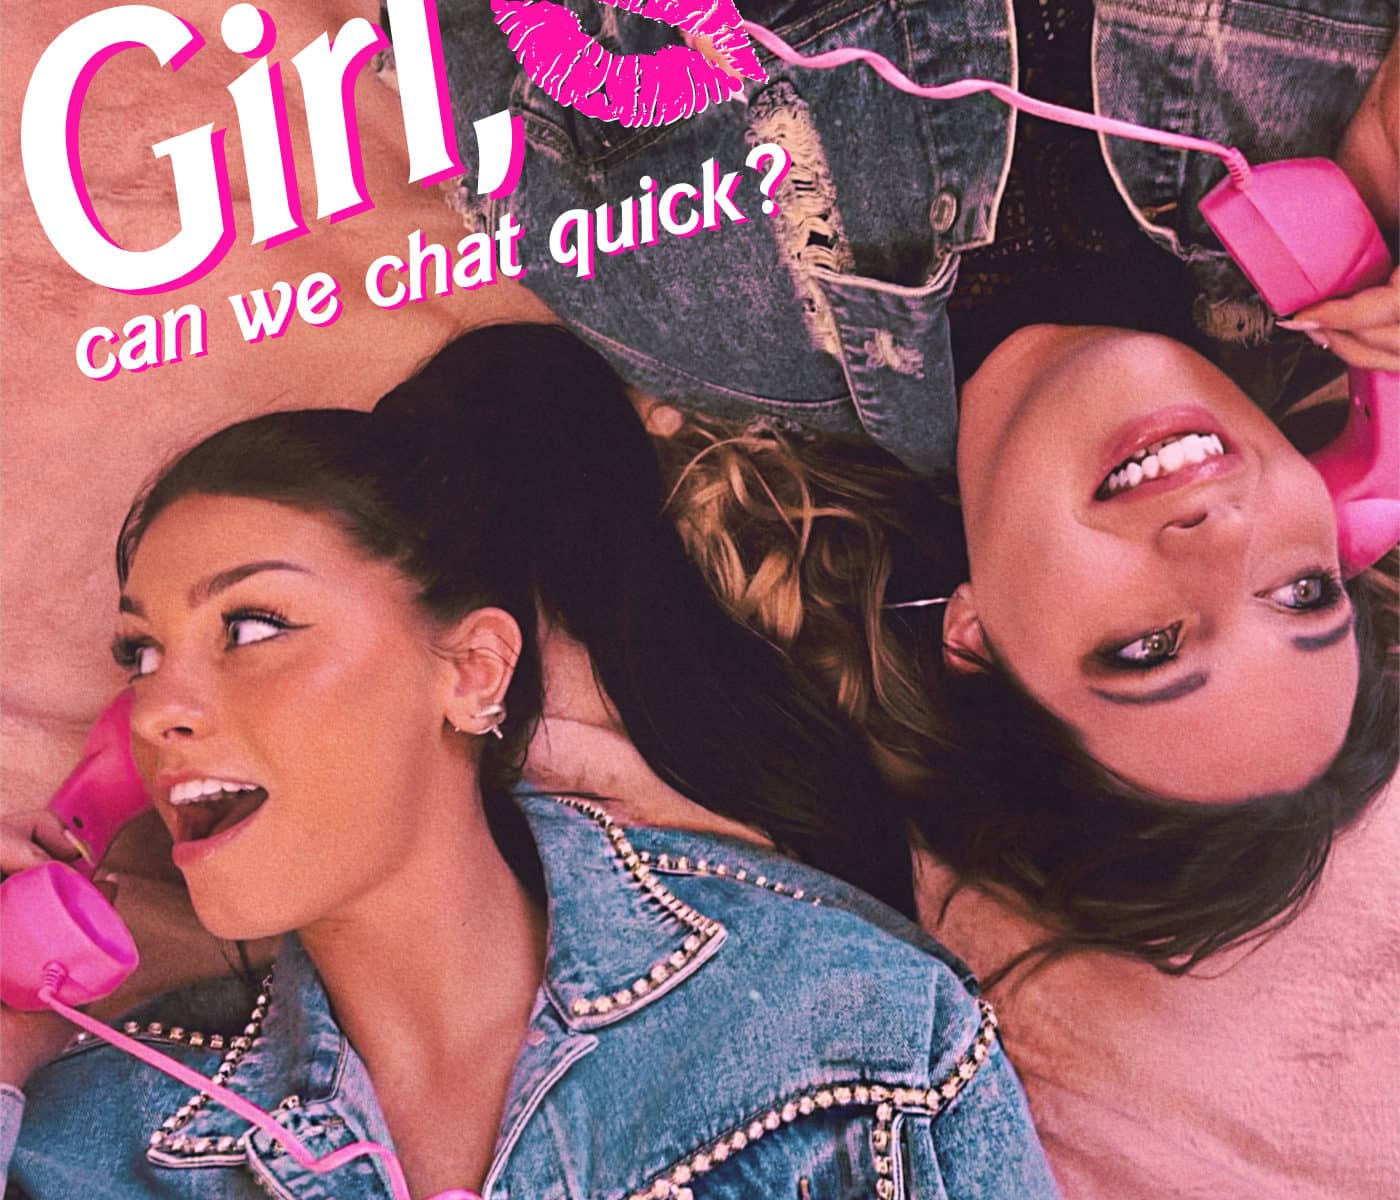 girl_can_we_chat_quick_podcast-12